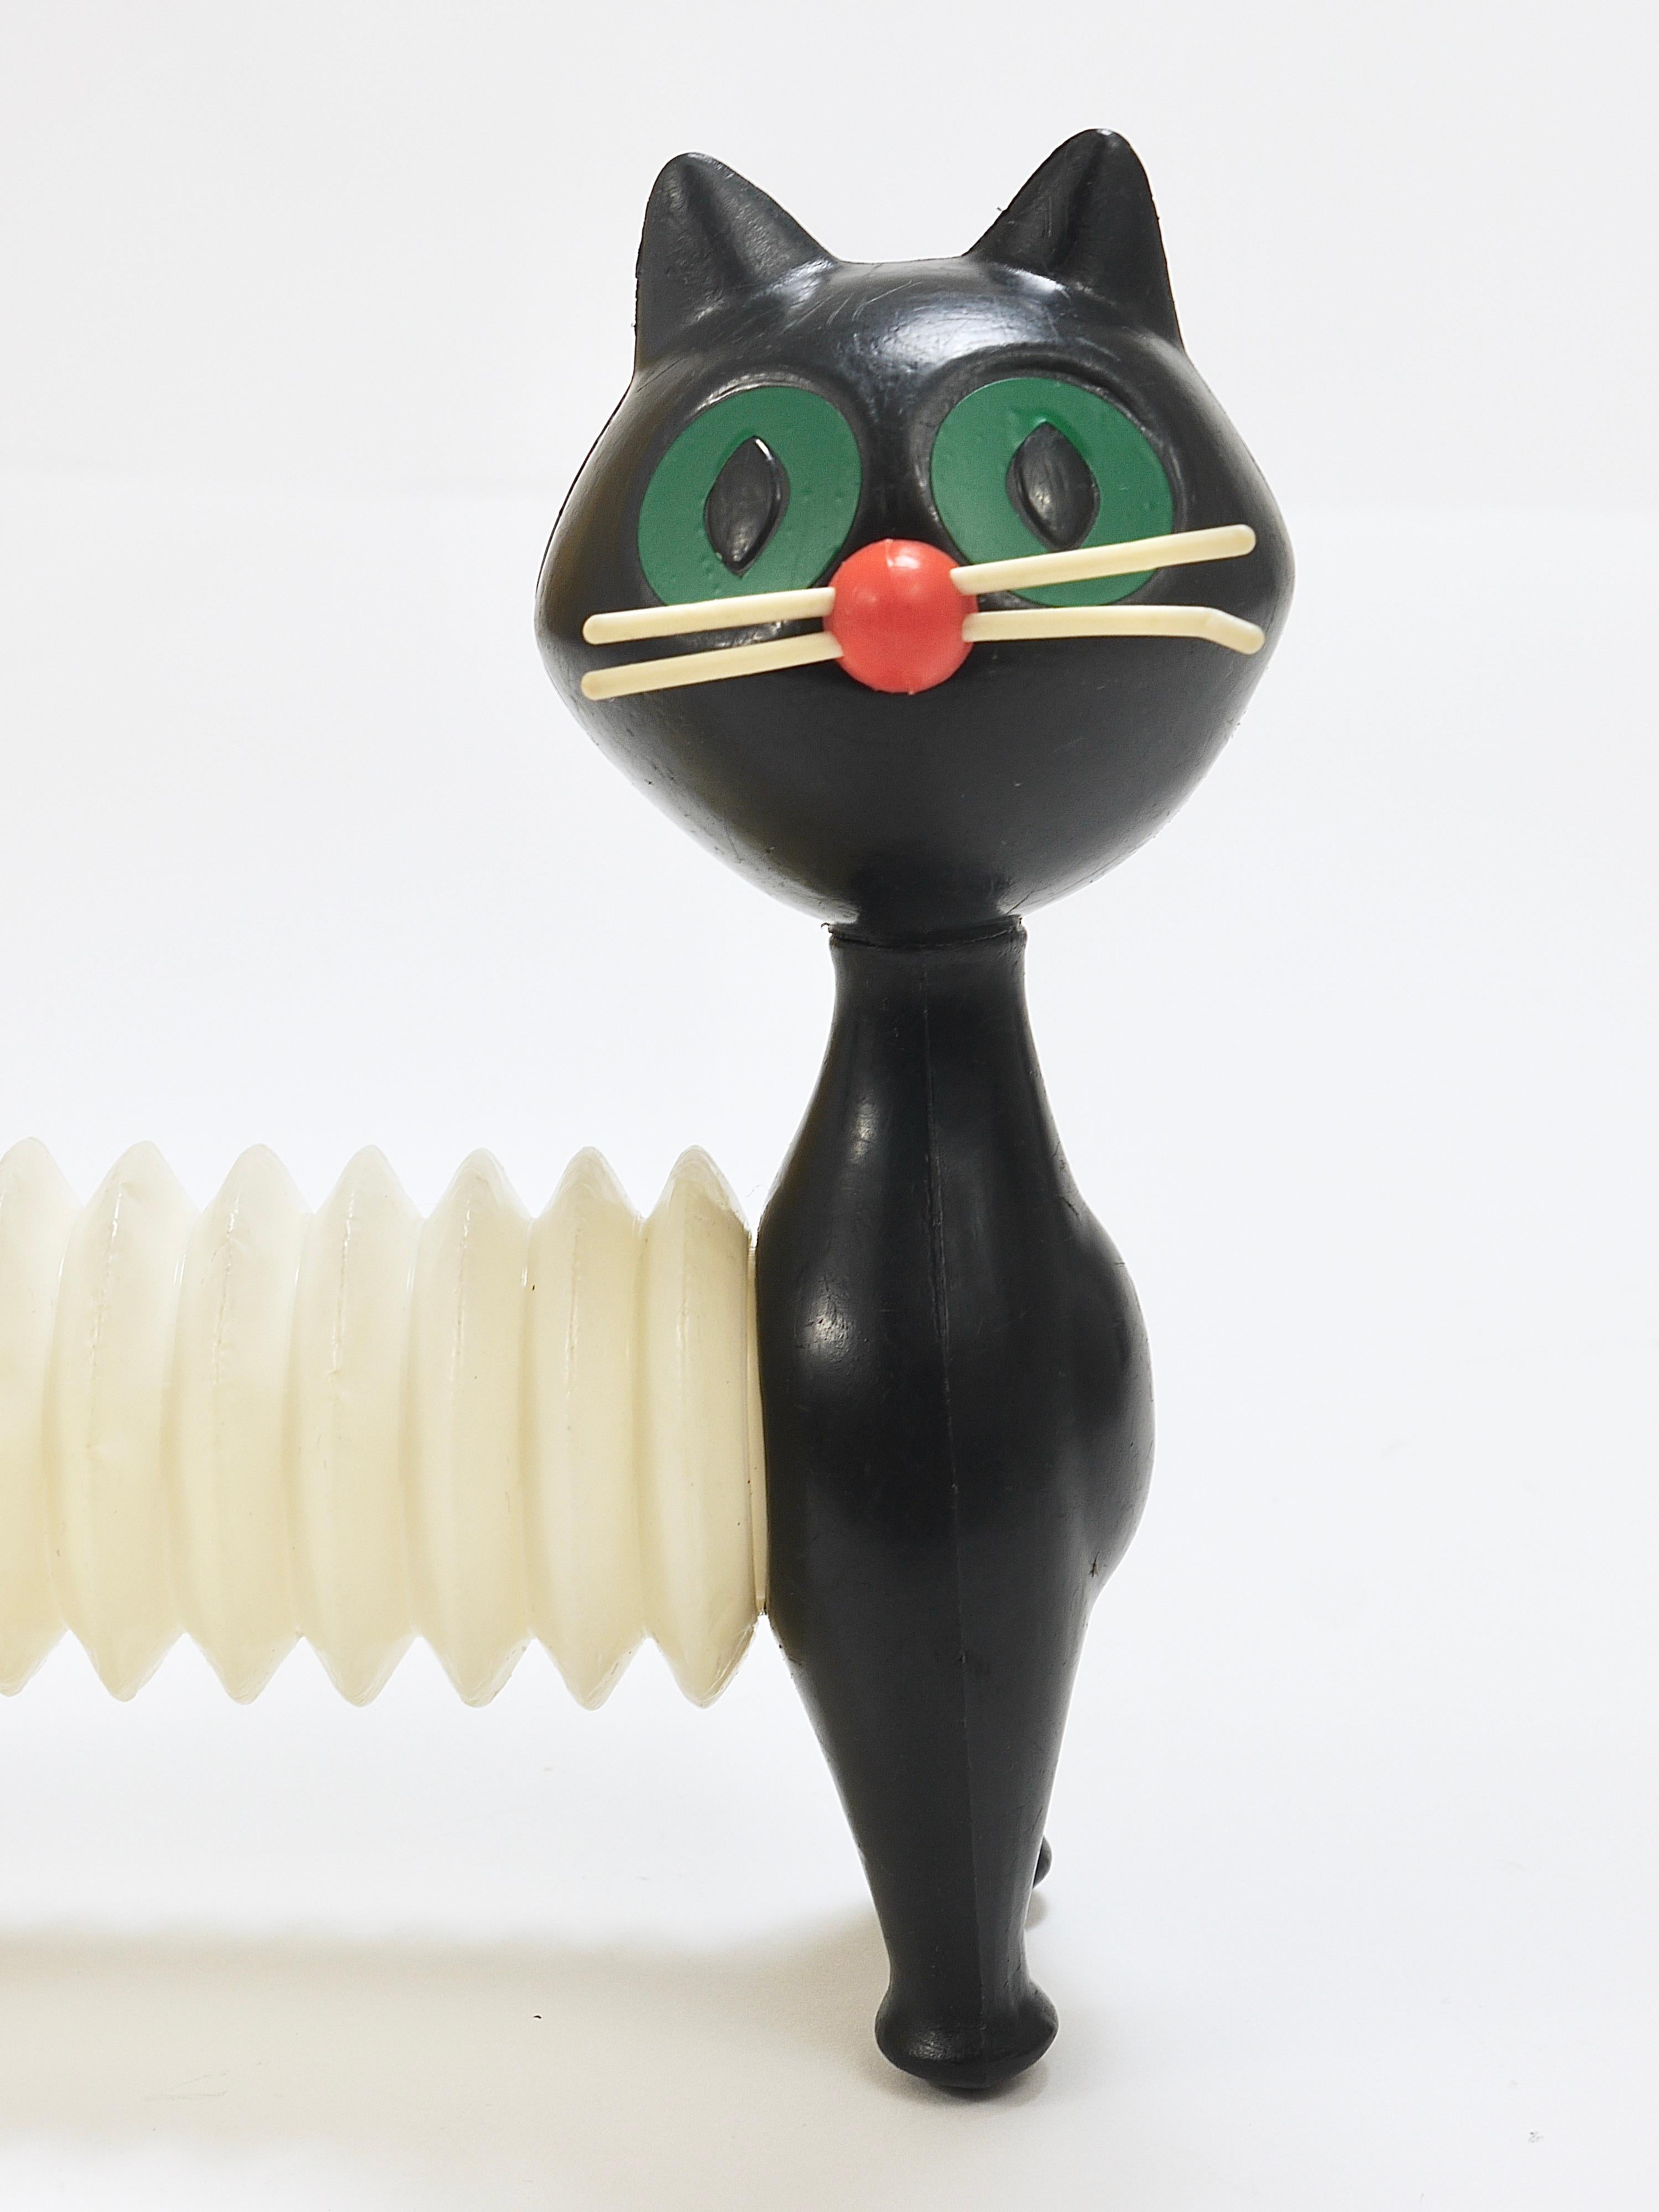 Libuse Niklova Accordion Squeaky Toy Cat „Tomcat“ by Fatra, Czechoslovakia 1960s For Sale 9